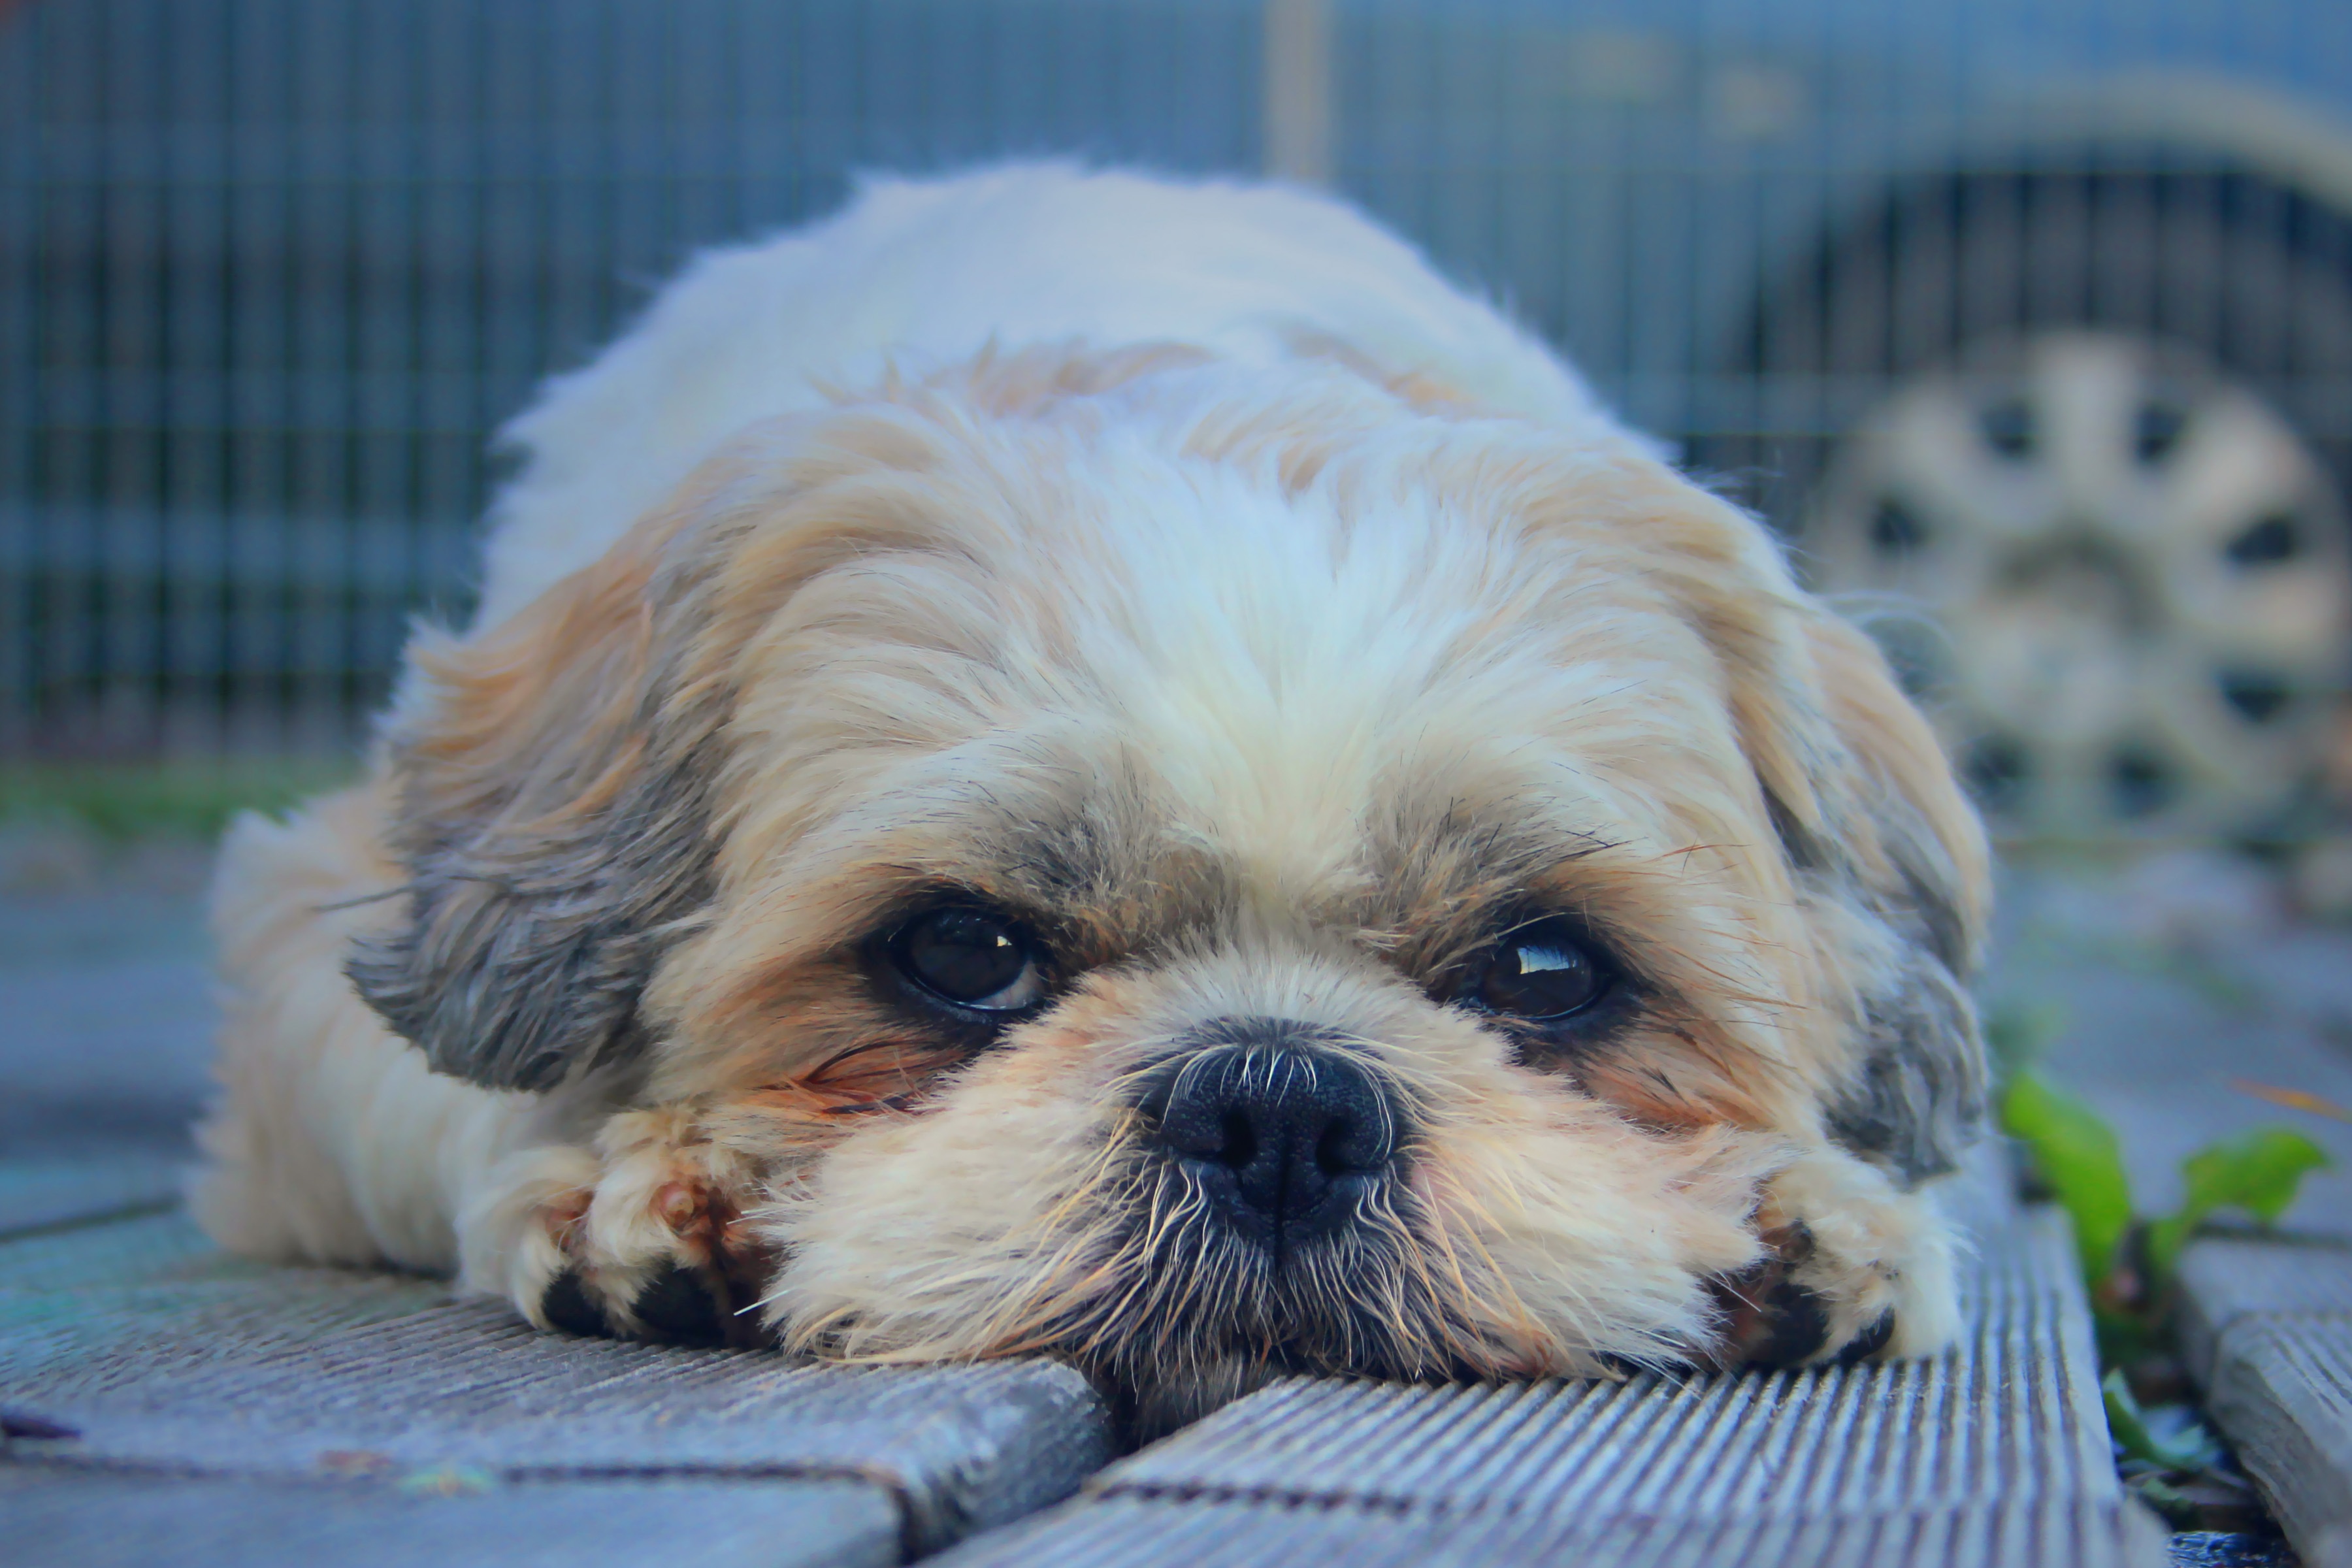 134419 download wallpaper animals, fluffy, dog, muzzle, sight, opinion, shih tzu screensavers and pictures for free